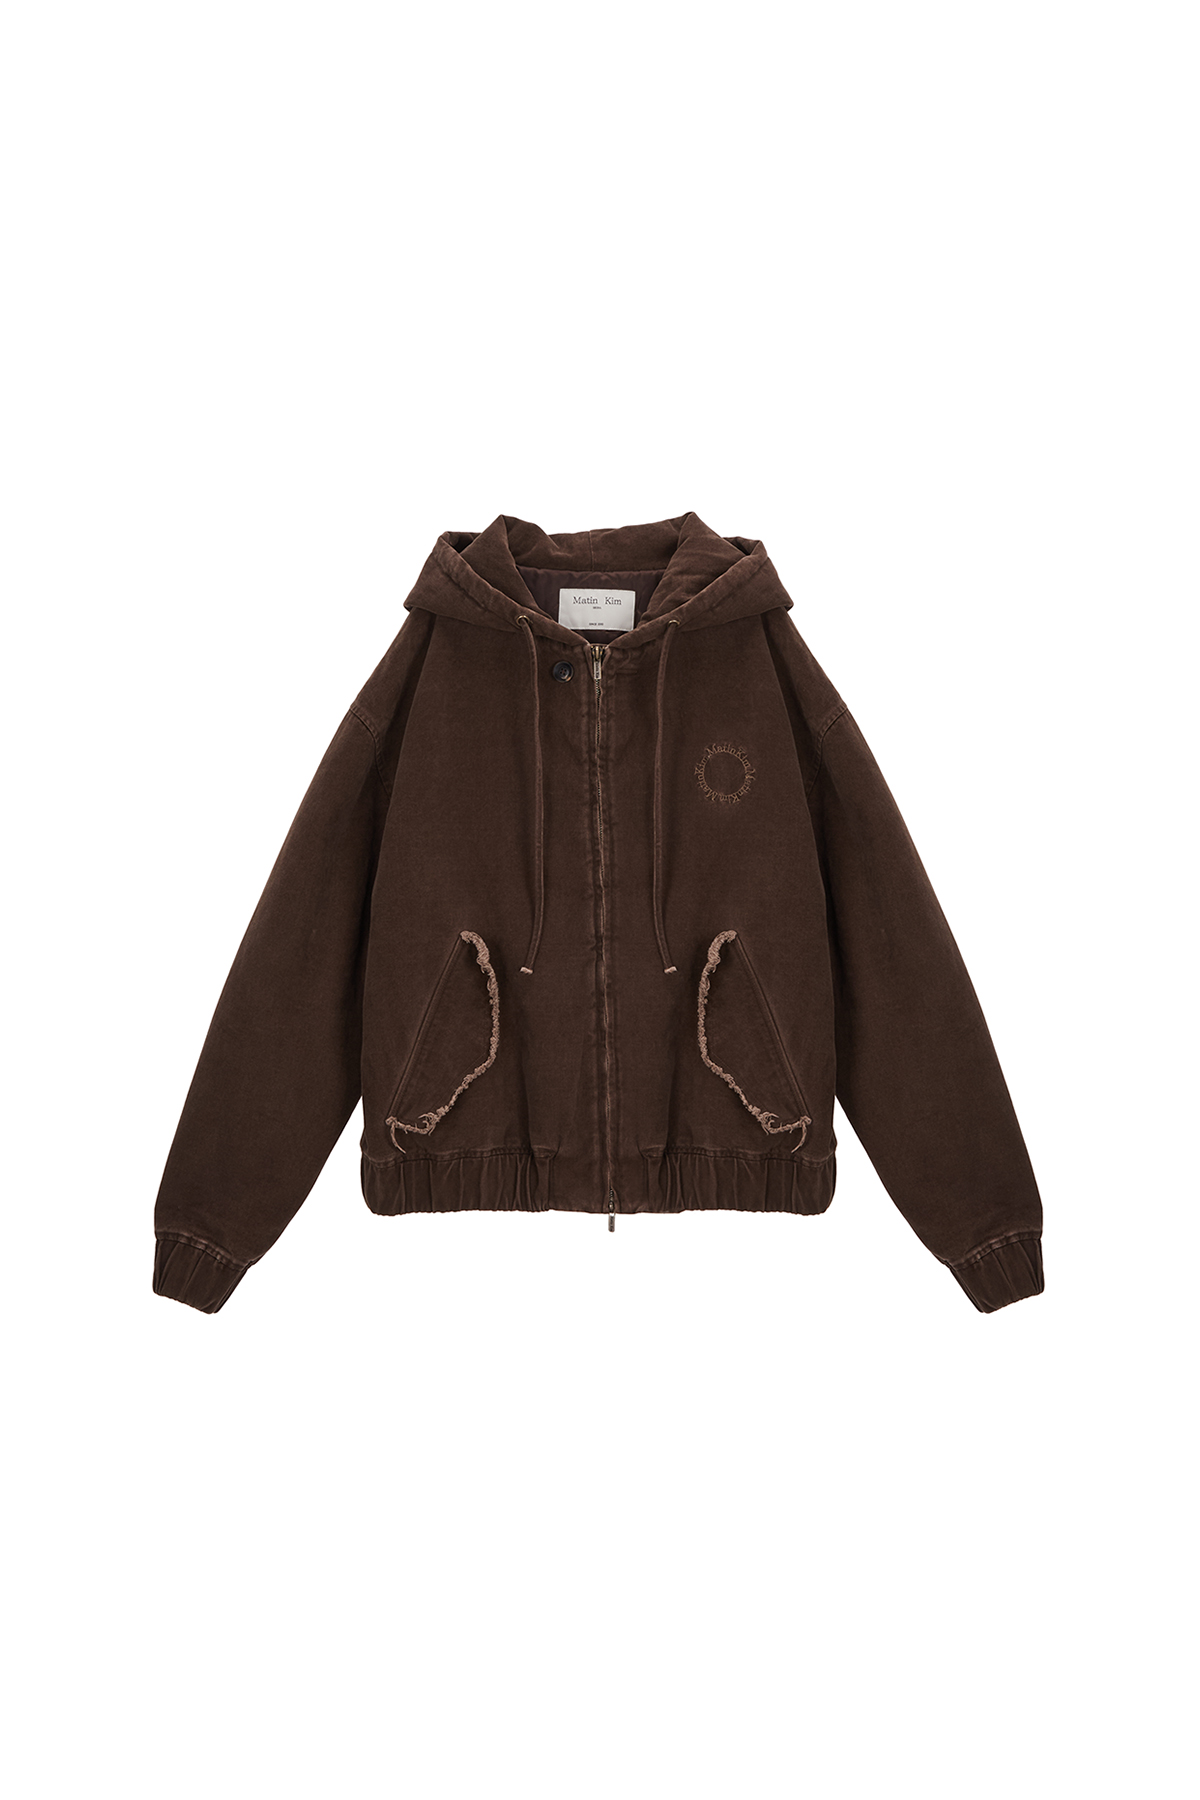 CATION WASHED HOODY ZIP UP JUMPER IN BROWN